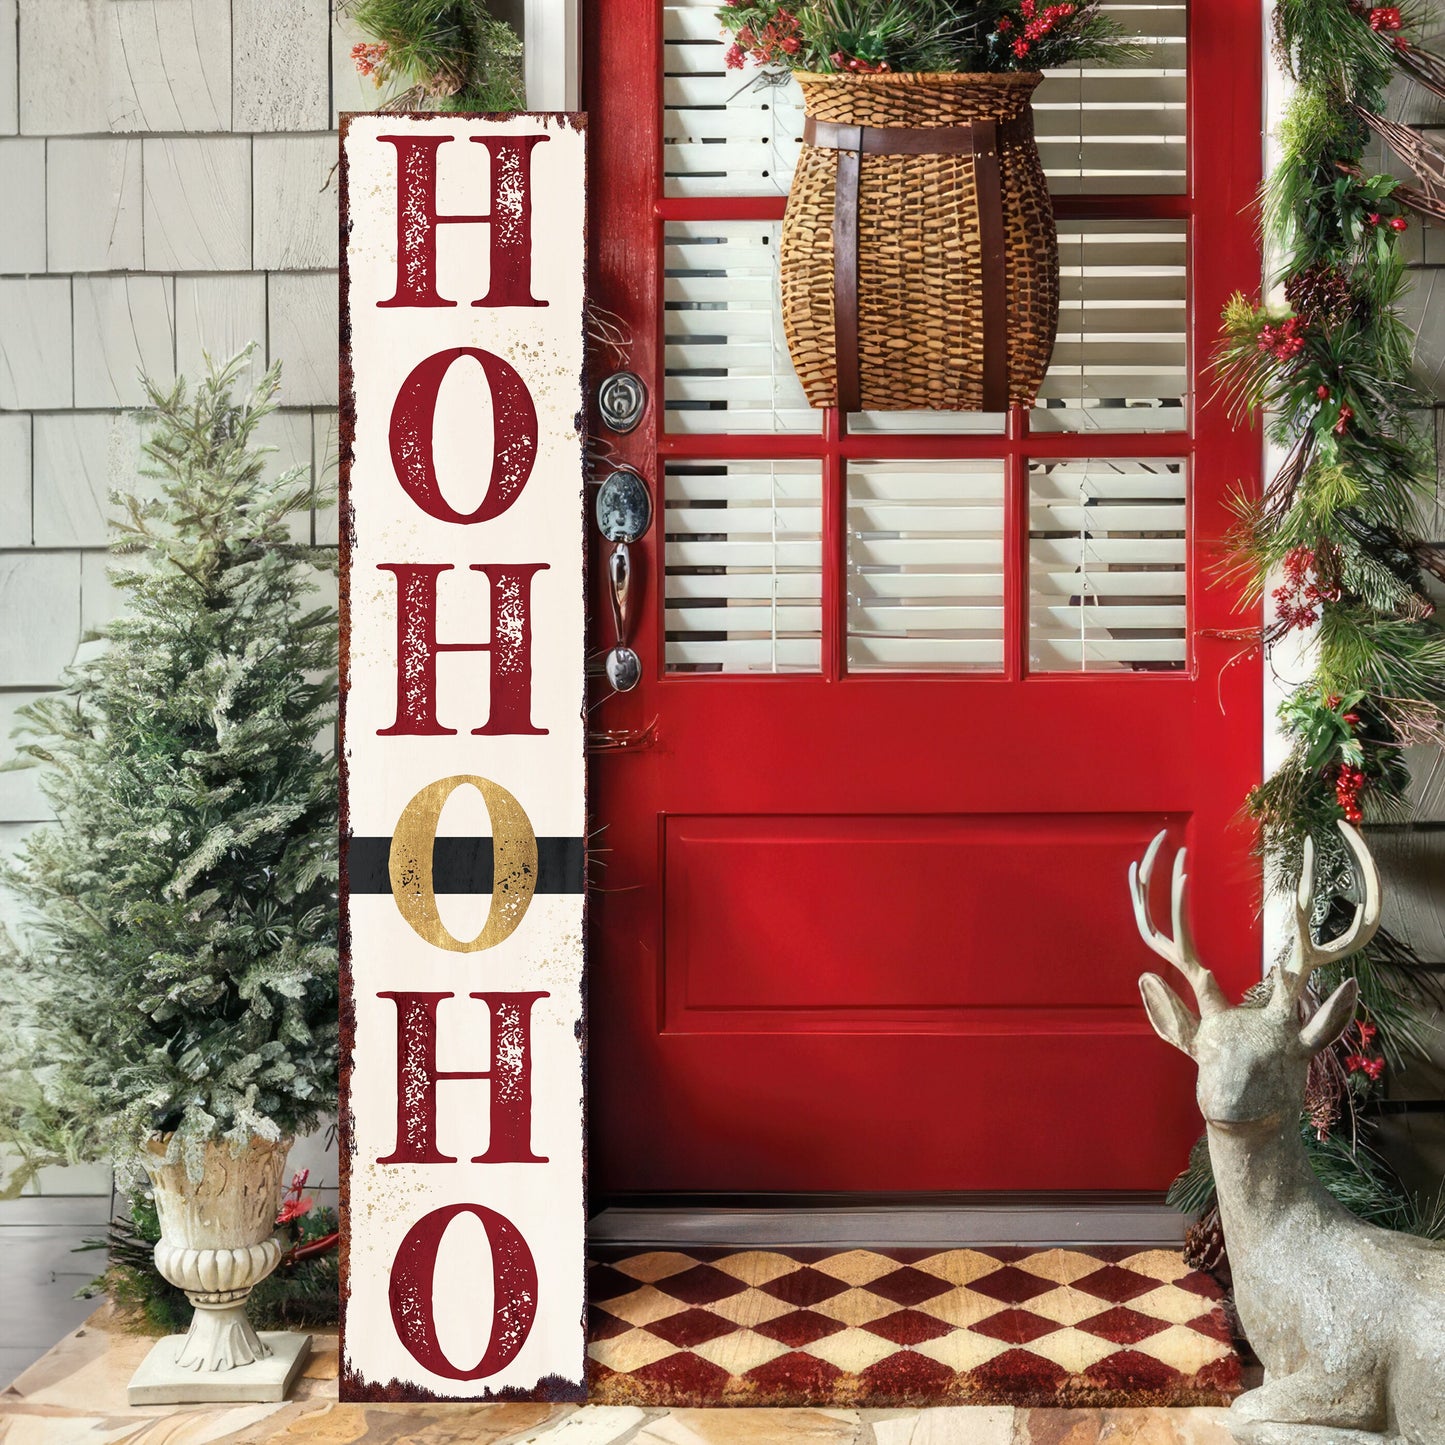 48in "Ho Ho Ho" Christmas Porch Sign | Front Porch Welcome Decor | Rustic Modern Farmhouse Entryway Board